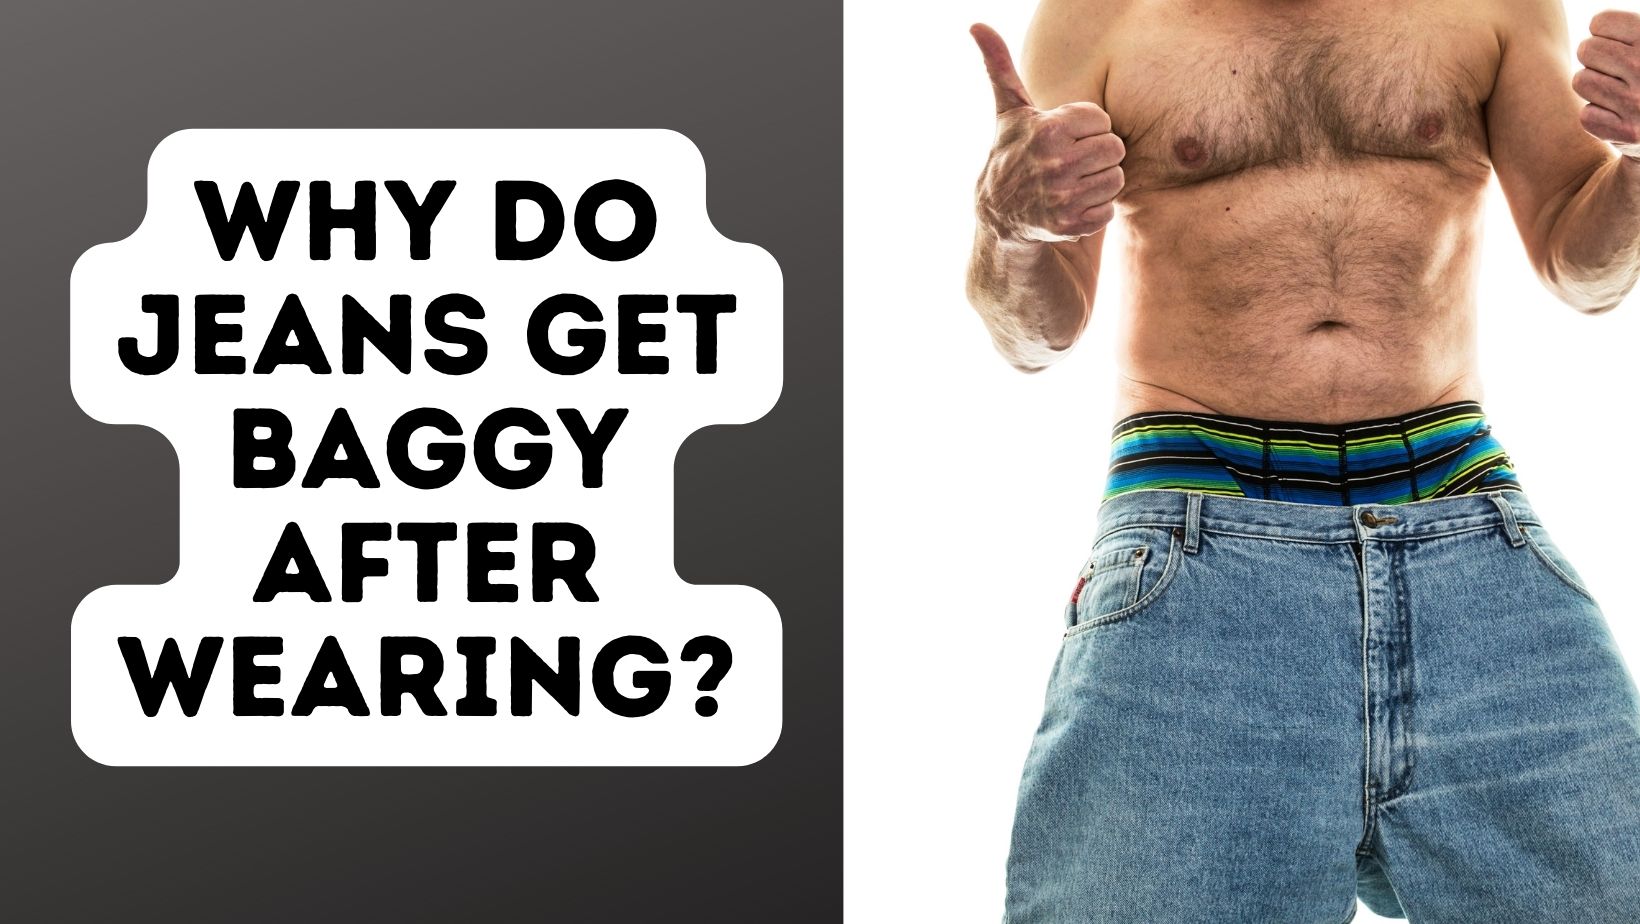 Why Do Jeans Get Baggy After Wearing?